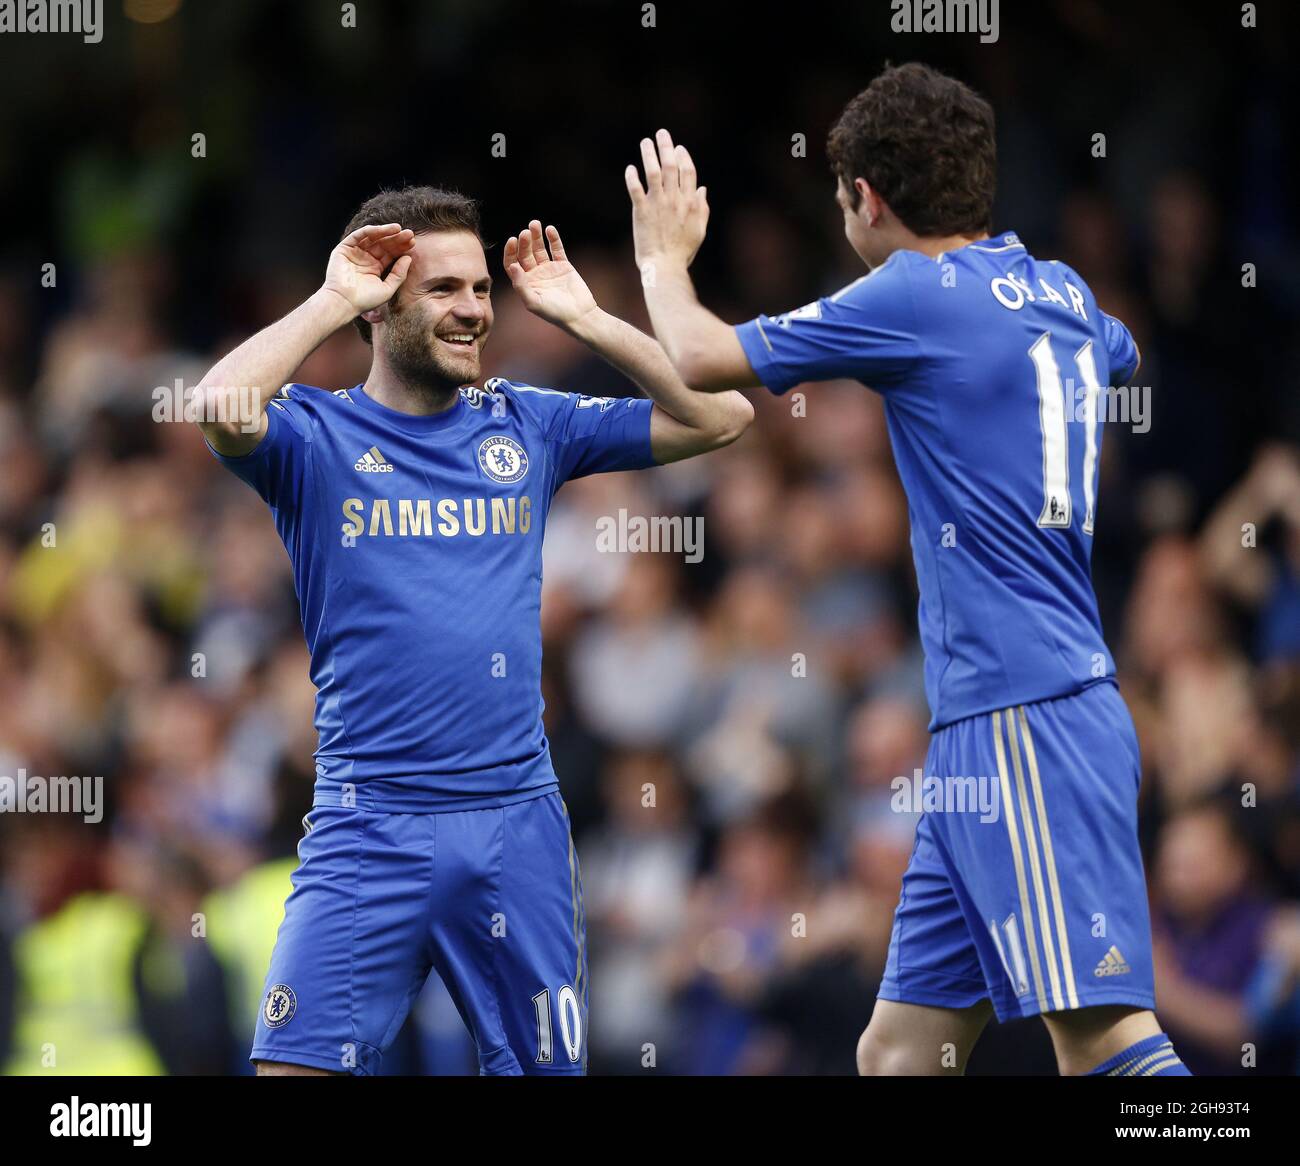 Chelsea's Oscar celebrates scoring his side's opening goal with Juan Mata during the Barclays Premier League match between Chelsea and Tottenham Hotspur at the Stamford Bridge in London on 8th May, 2013. Stock Photo